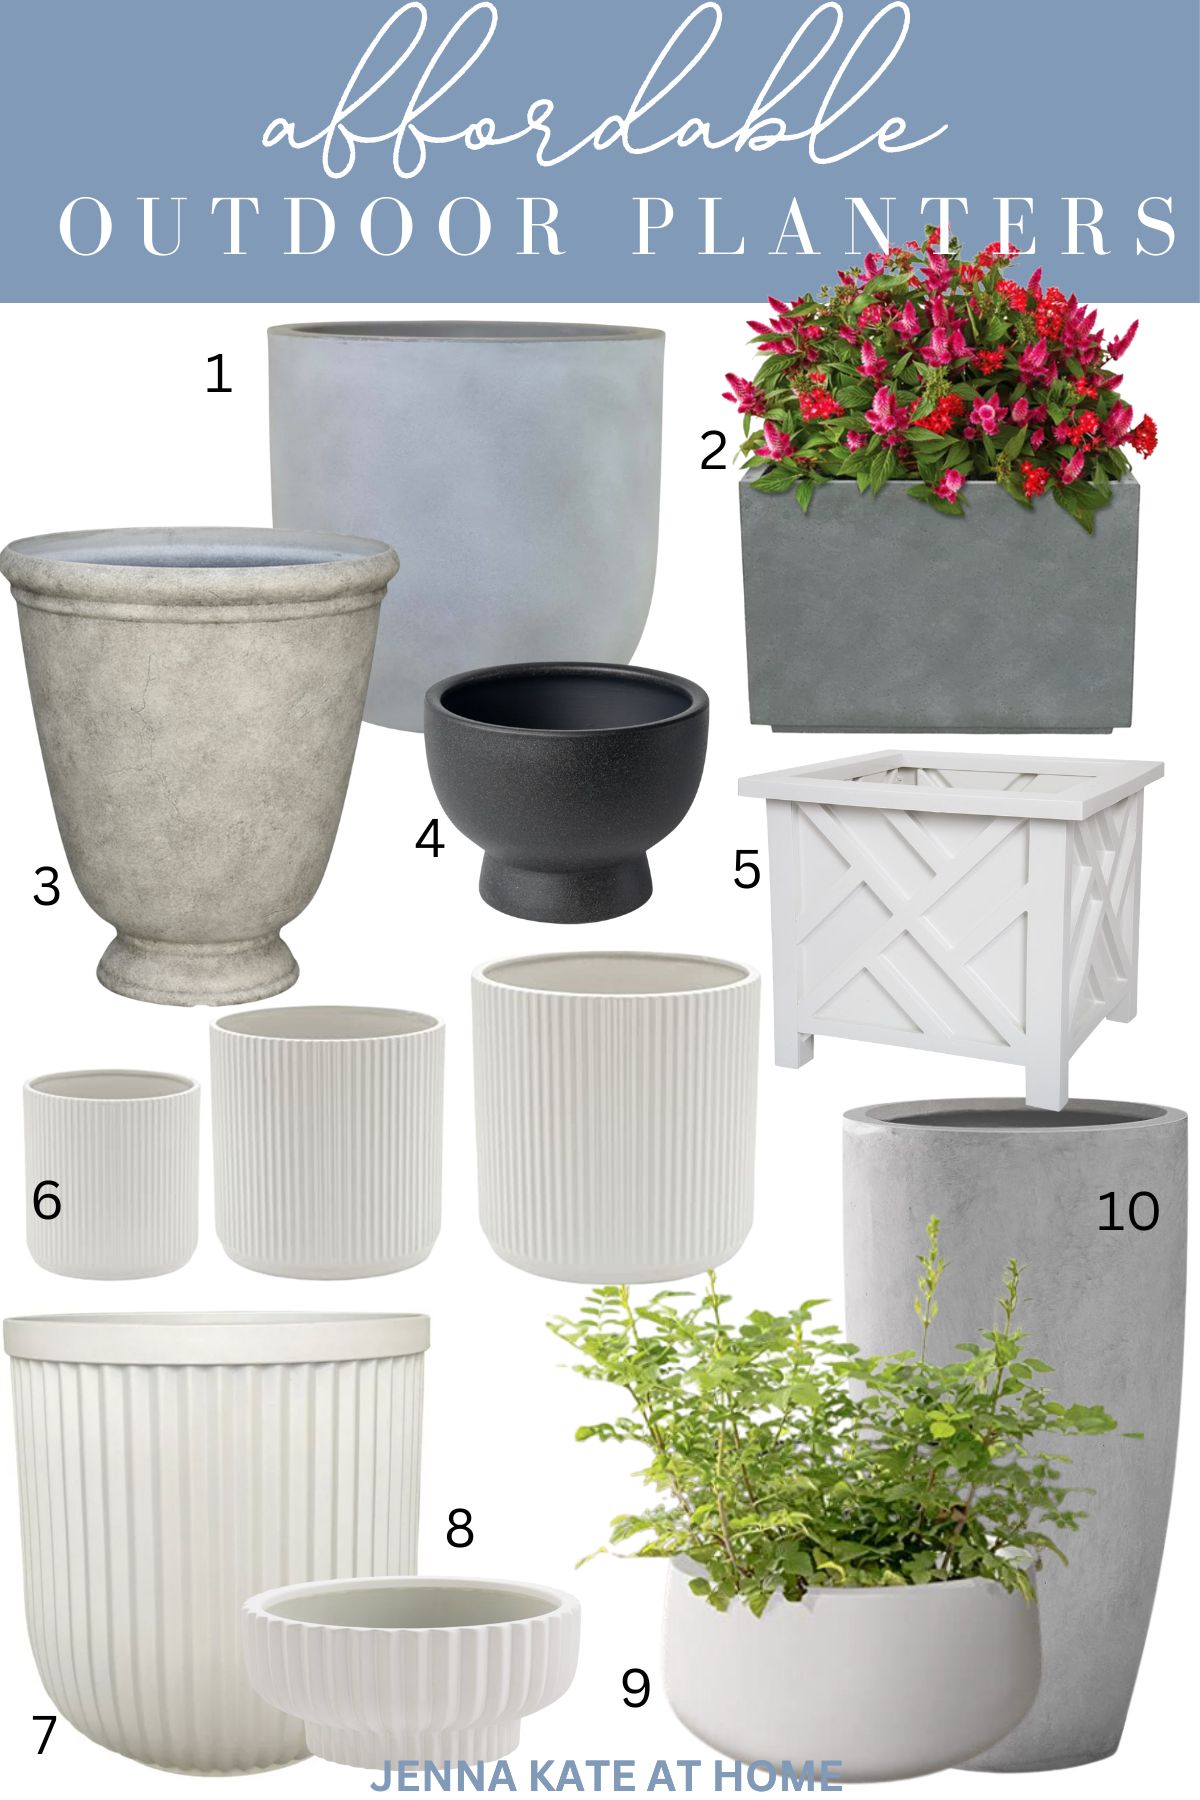 outdoor planters collage
